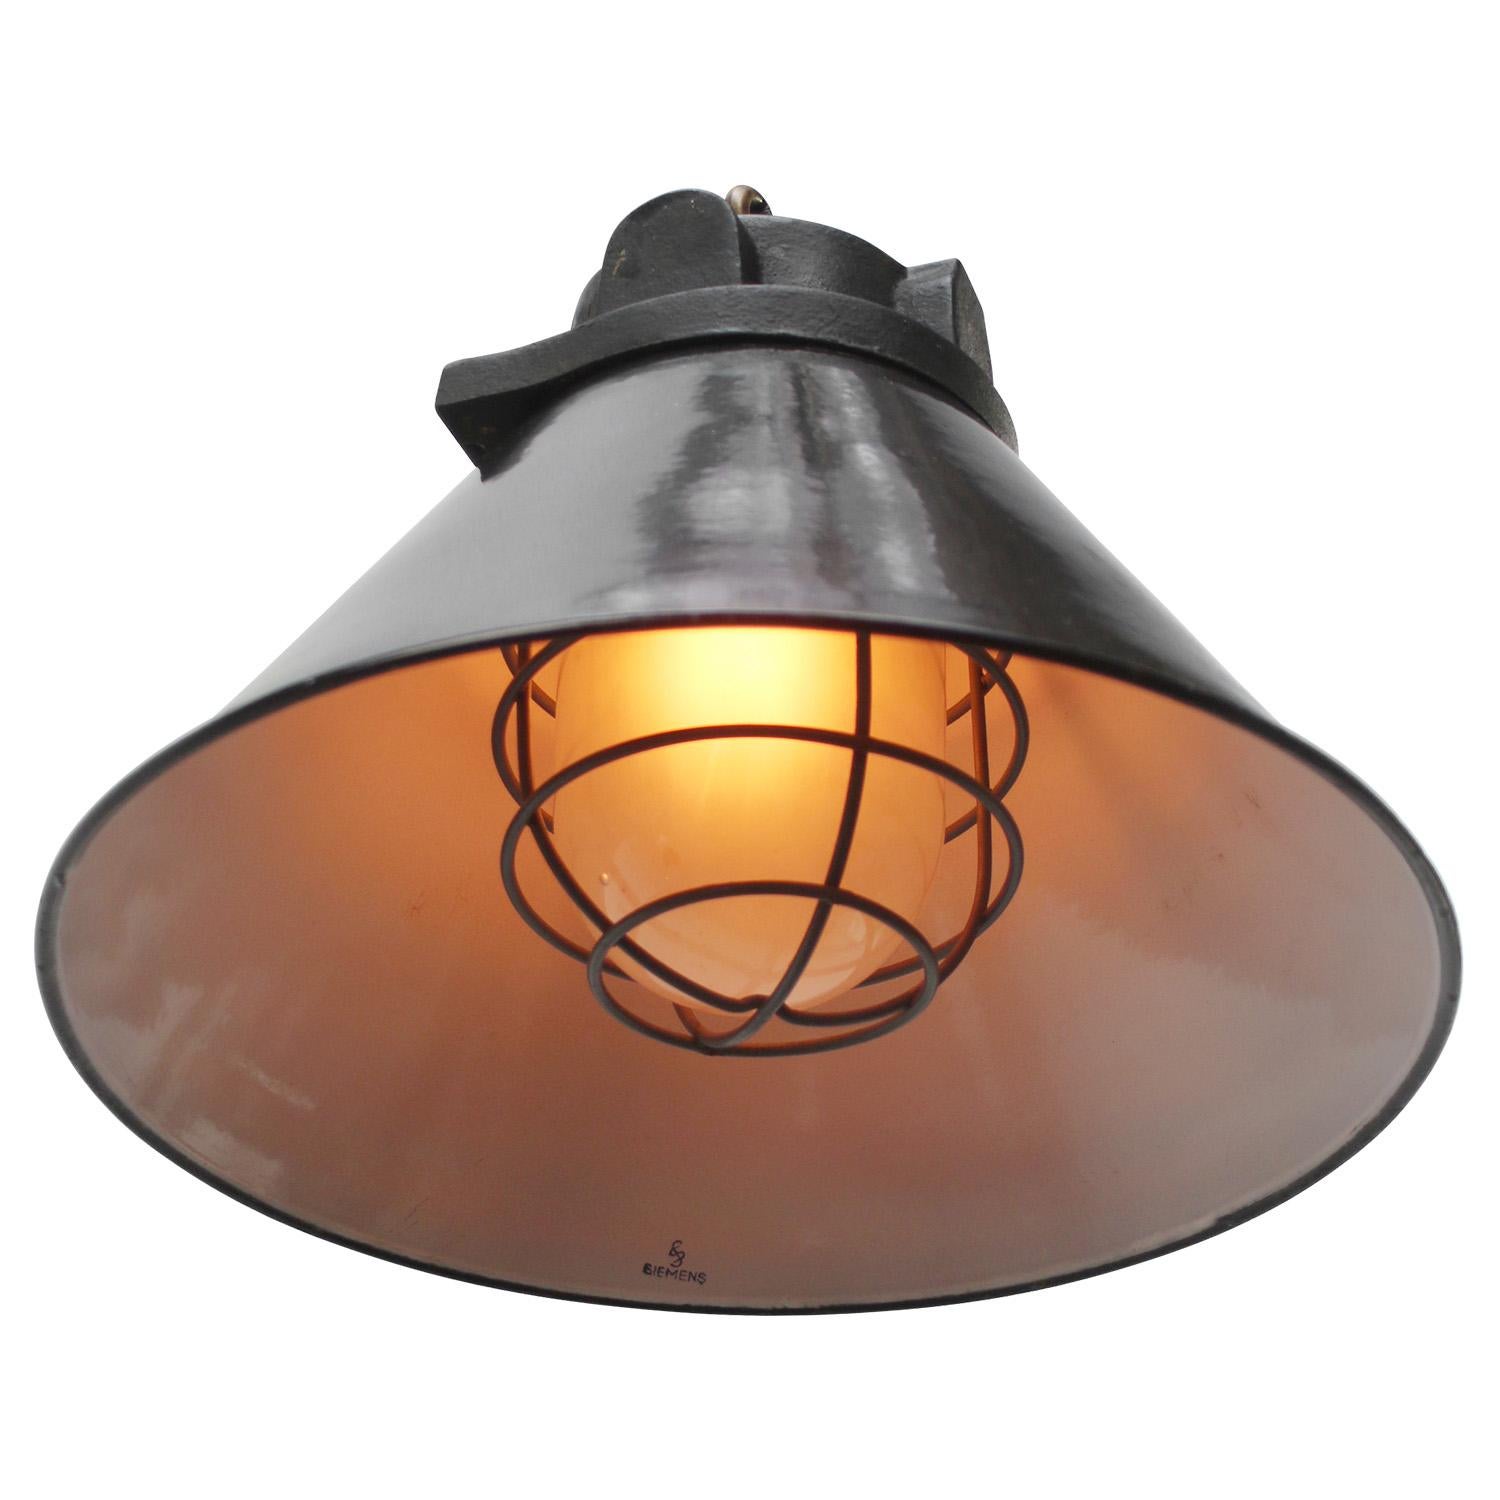 Original Siemens factory pendant
very rare early model
black enamel white interior
cast iron top with frosted glass and cage

Weight: 6.20 kg / 13.7 lb

Priced per individual item. All lamps have been made suitable by international standards for